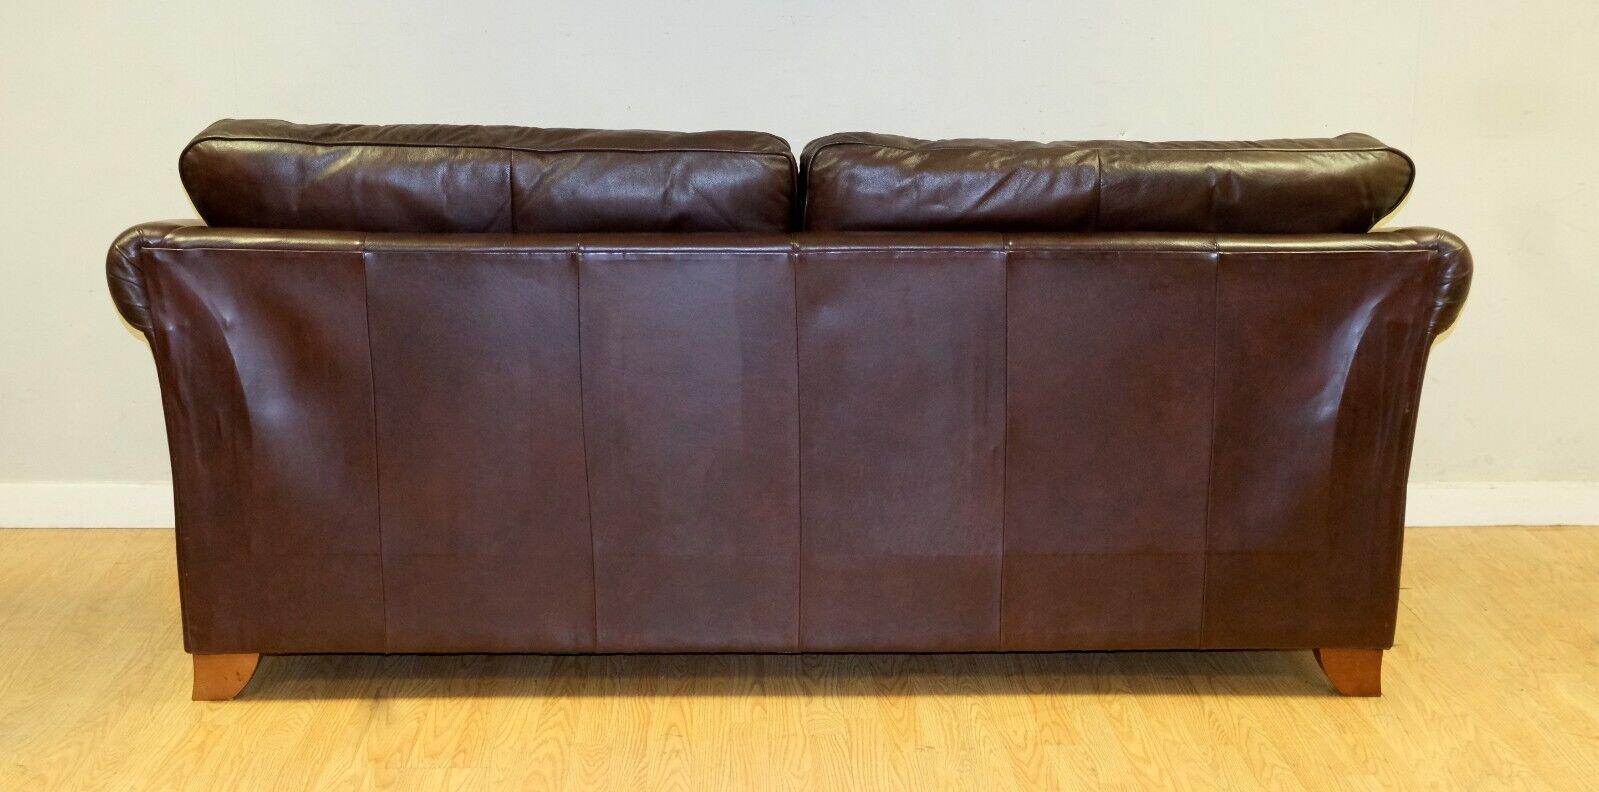 LOVELY MARKS & SPENCER ABBEY BRoWN LEATHER TWO SEATER SOFA ON WOODEN FEETs (Handgefertigt) im Angebot